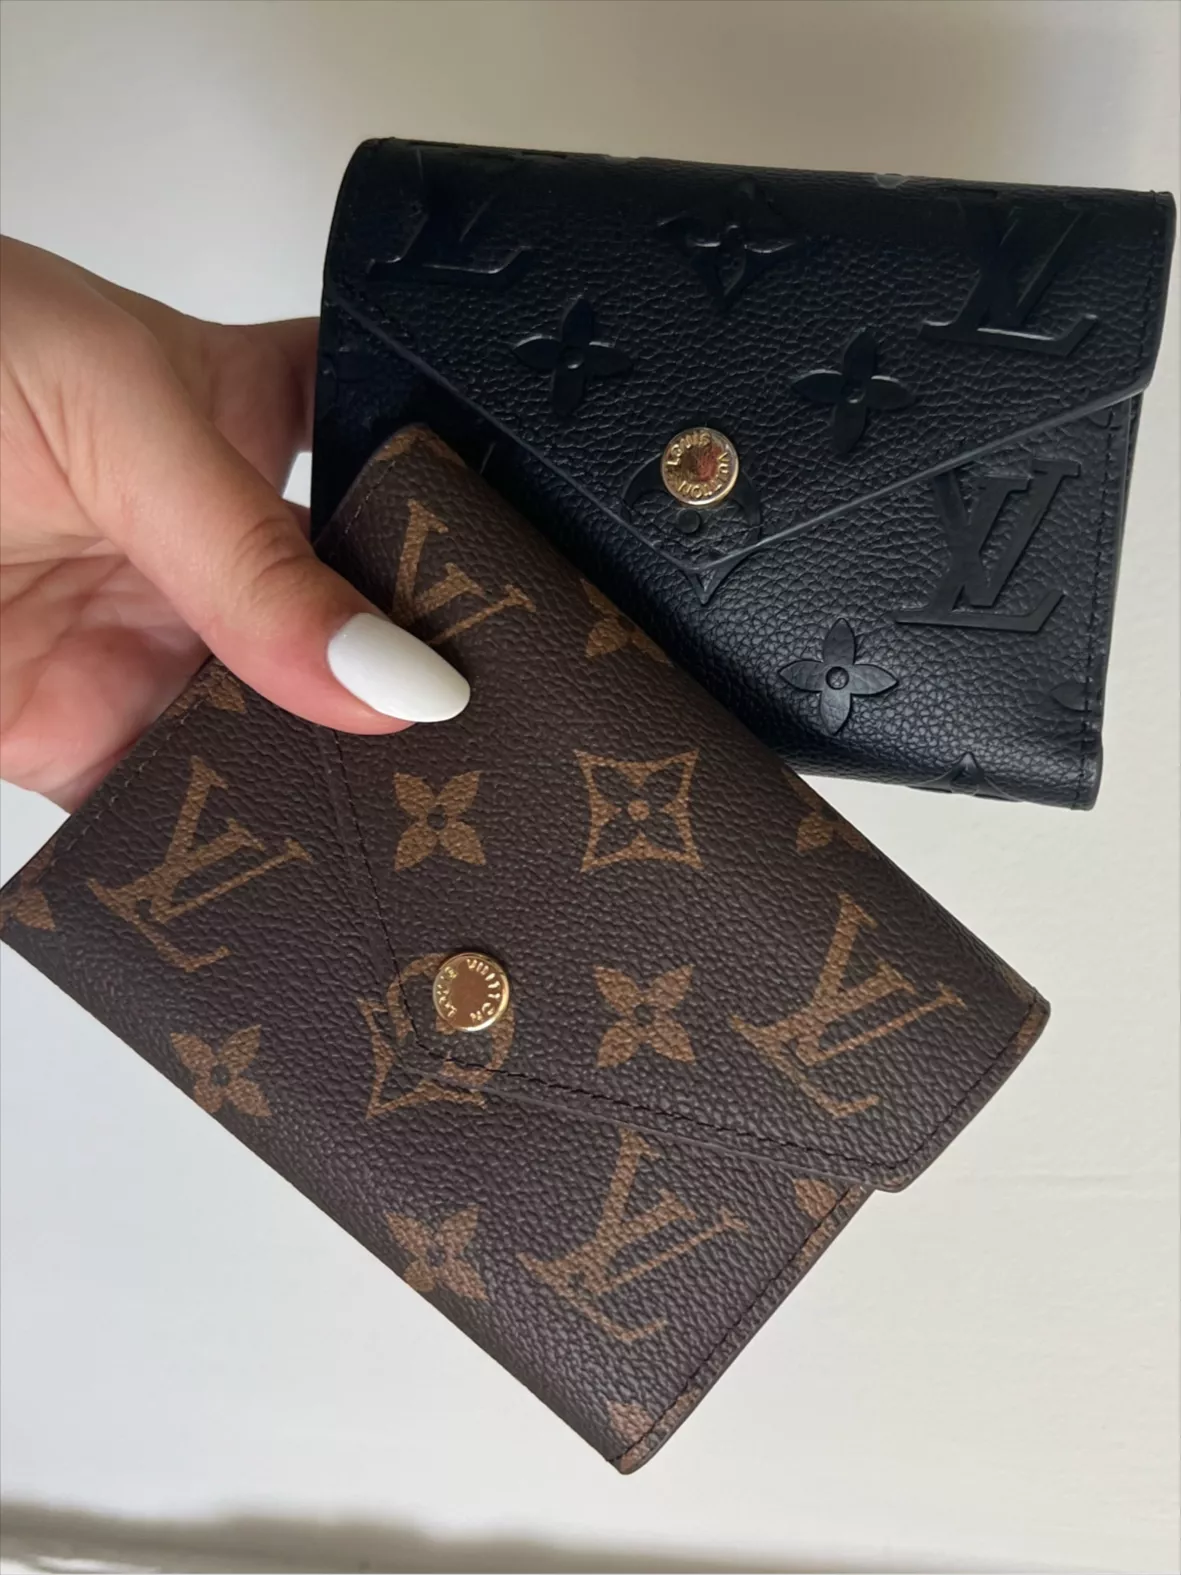 This Dhgate LV keychain is so pretty. $20. Find this and more in